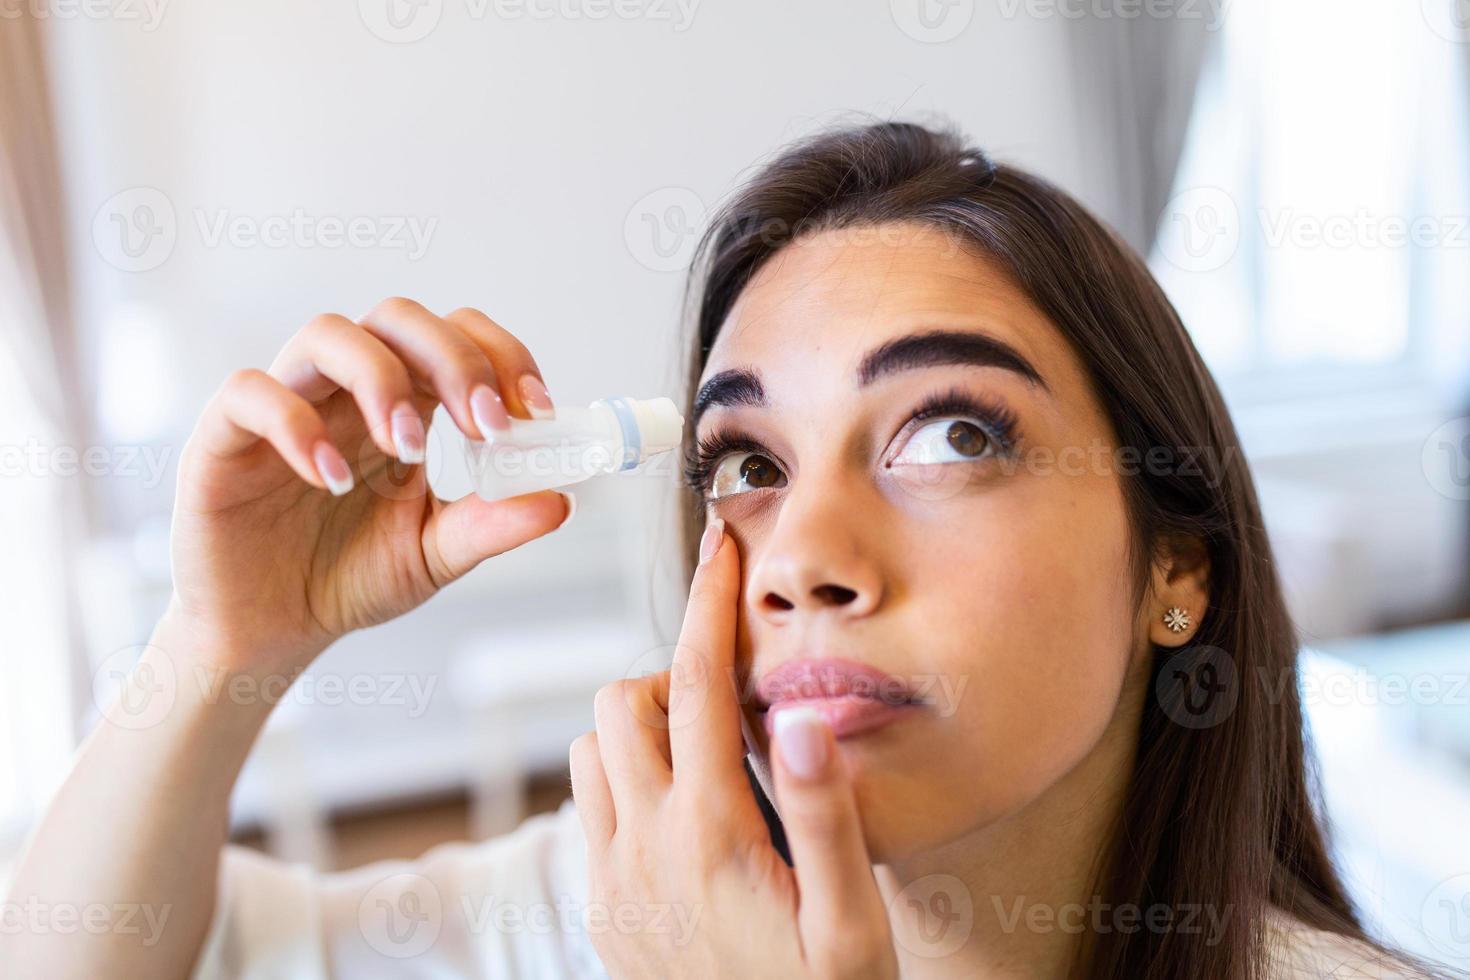 Vision And Ophthalmology Medicine. Closeup Of Beautiful Woman Applying Eyedrops In Her Eyes. Young Female Model With Natural Makeup Using A Bottle Of Eye Drops. Health Concept. High Resolution photo